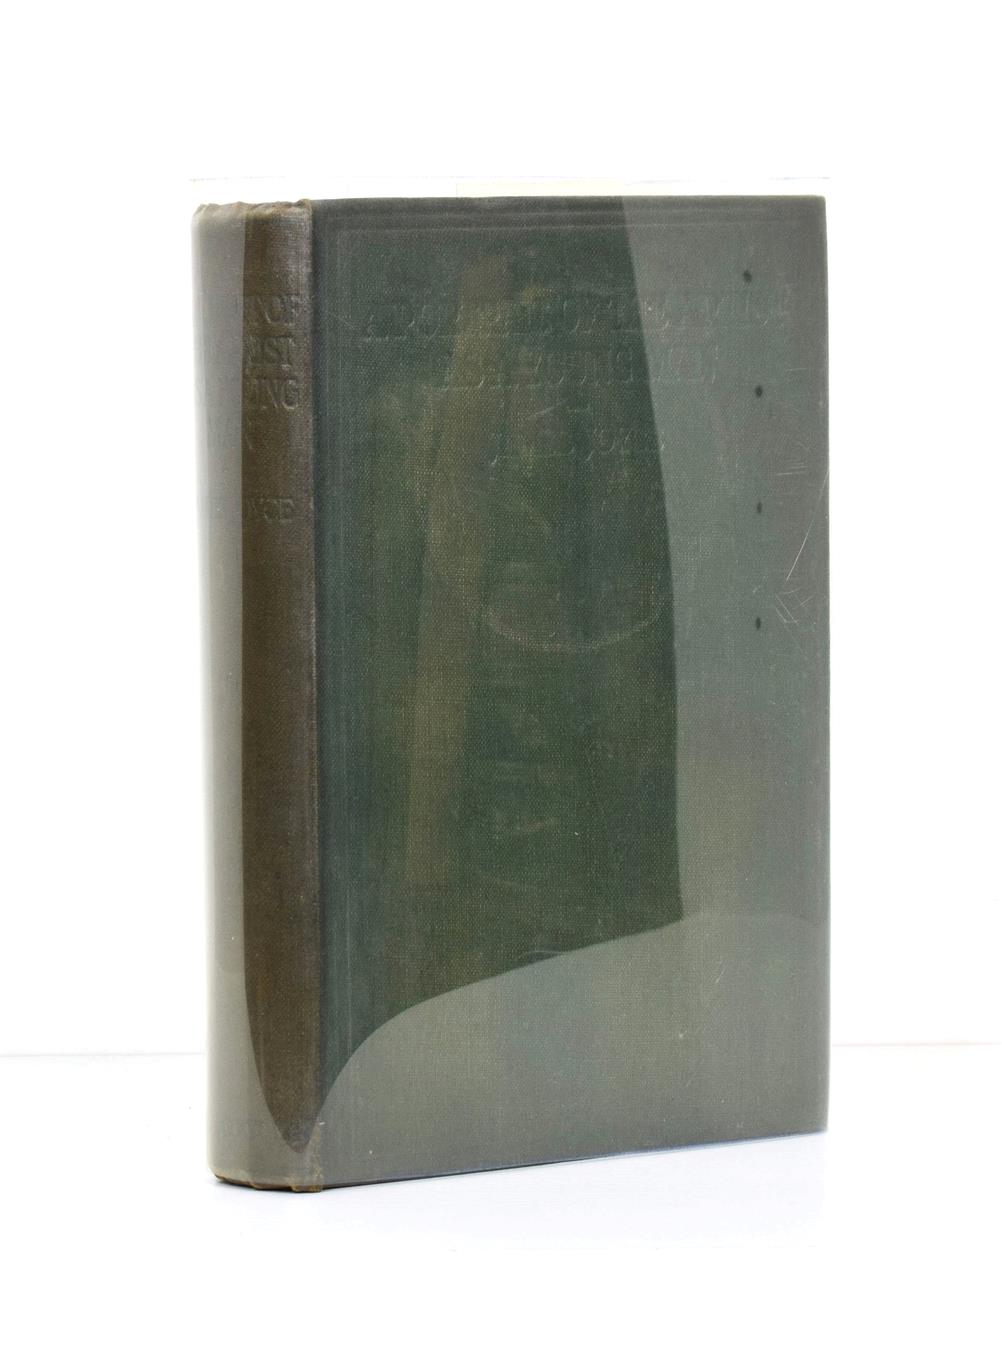 Lot 88 - Joyce (James) A Portrait of the Artist as a Young Man, The Egoist Press, 1921, third edition,...